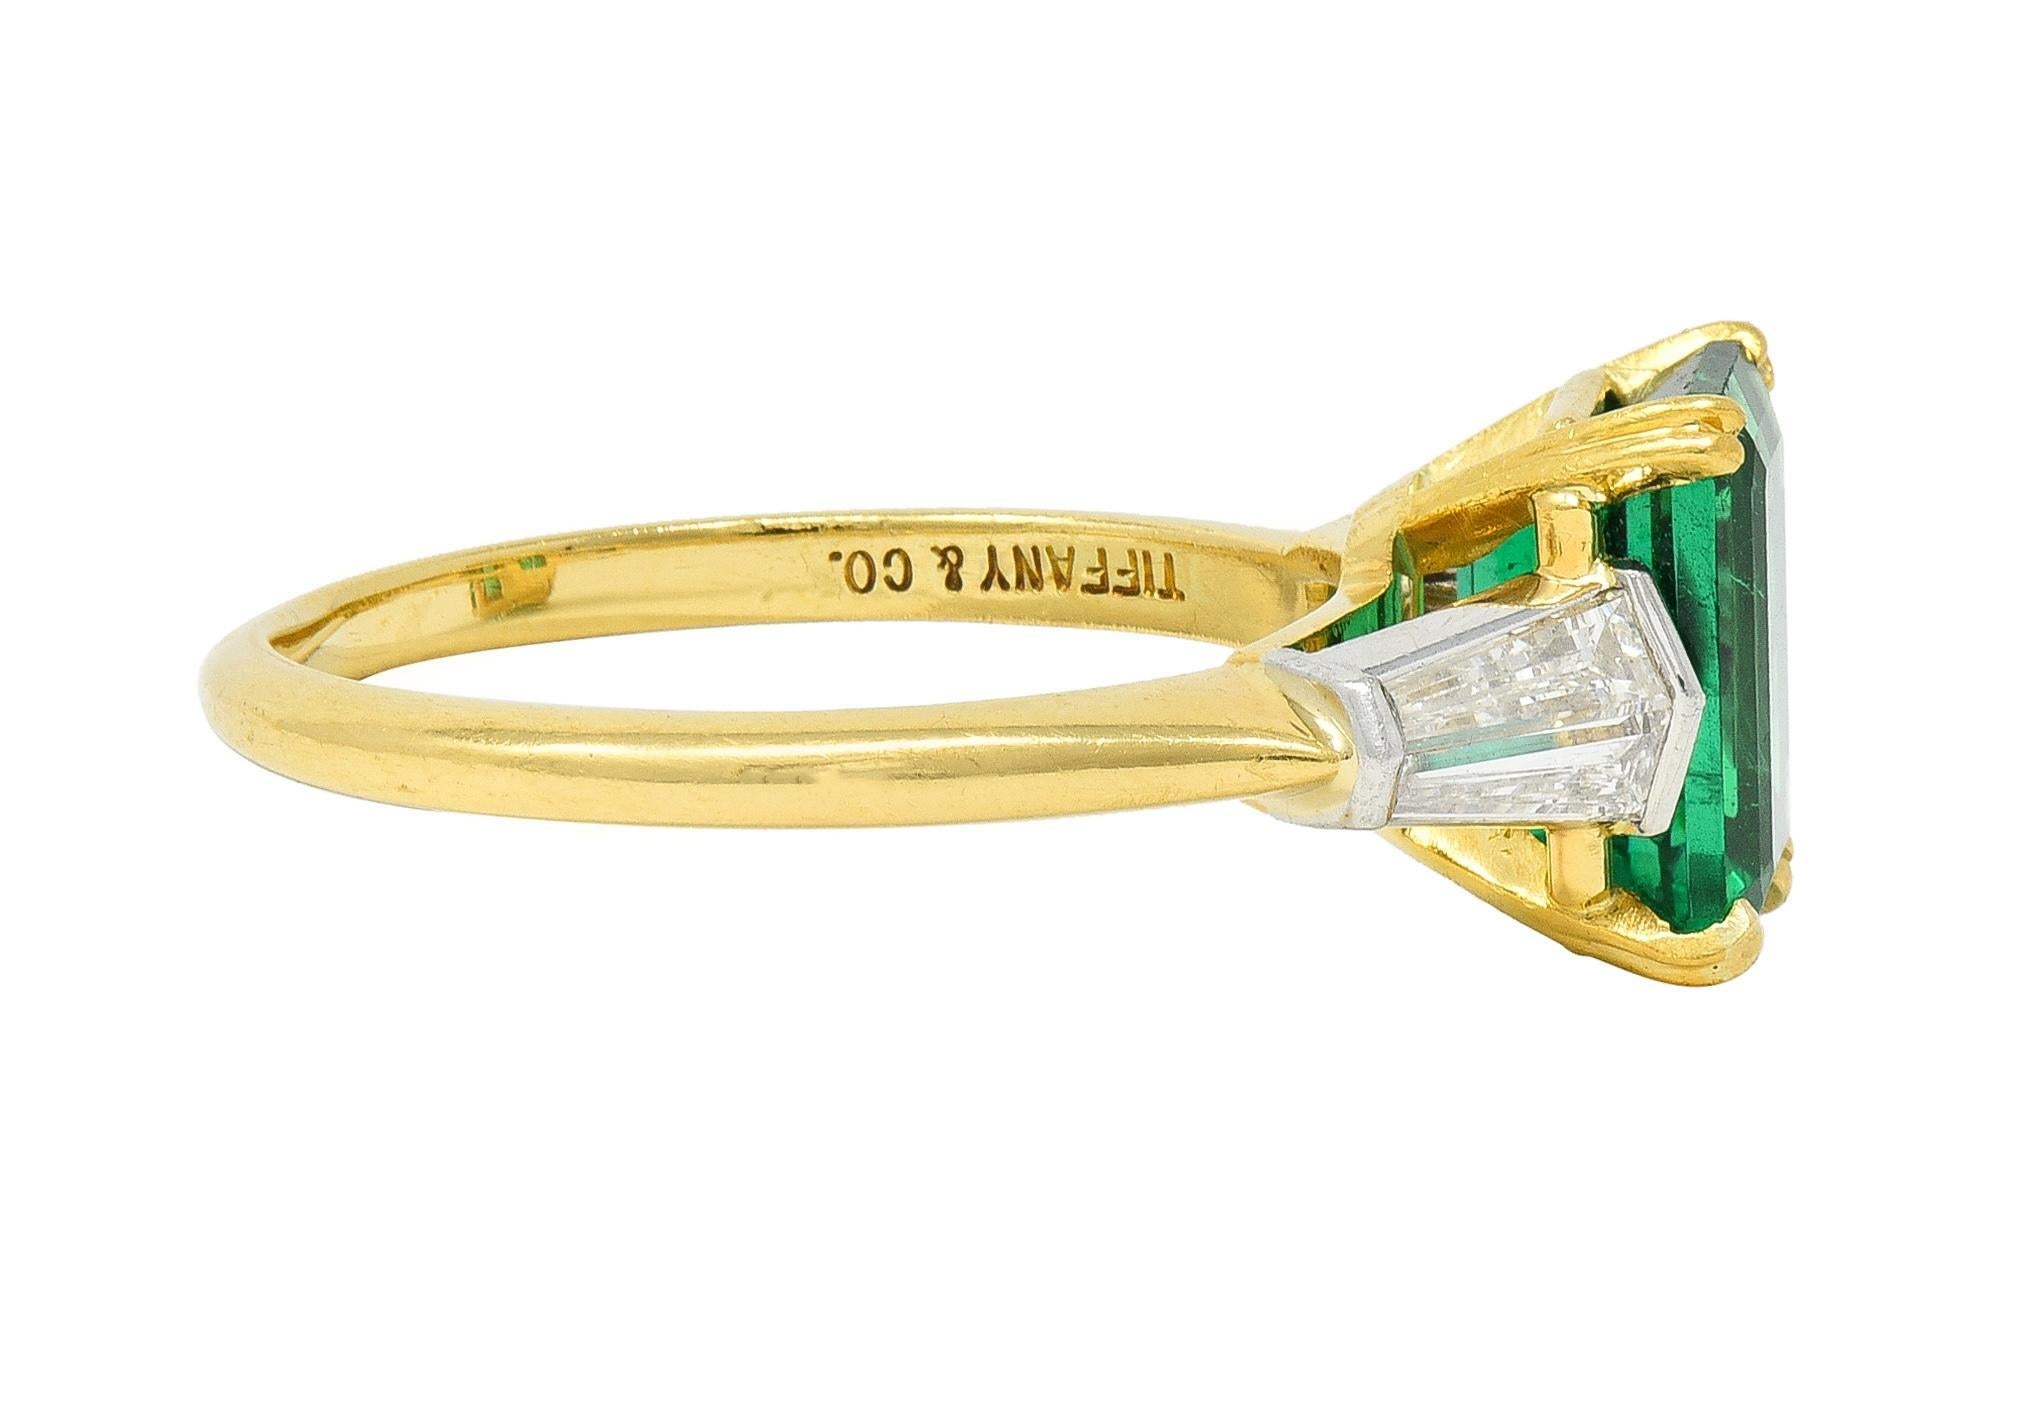 Tiffany & Co. 3.15 CTW Emerald Diamond Platinum 18 Karat Gold Vintage Ring AGL In Excellent Condition For Sale In Philadelphia, PA